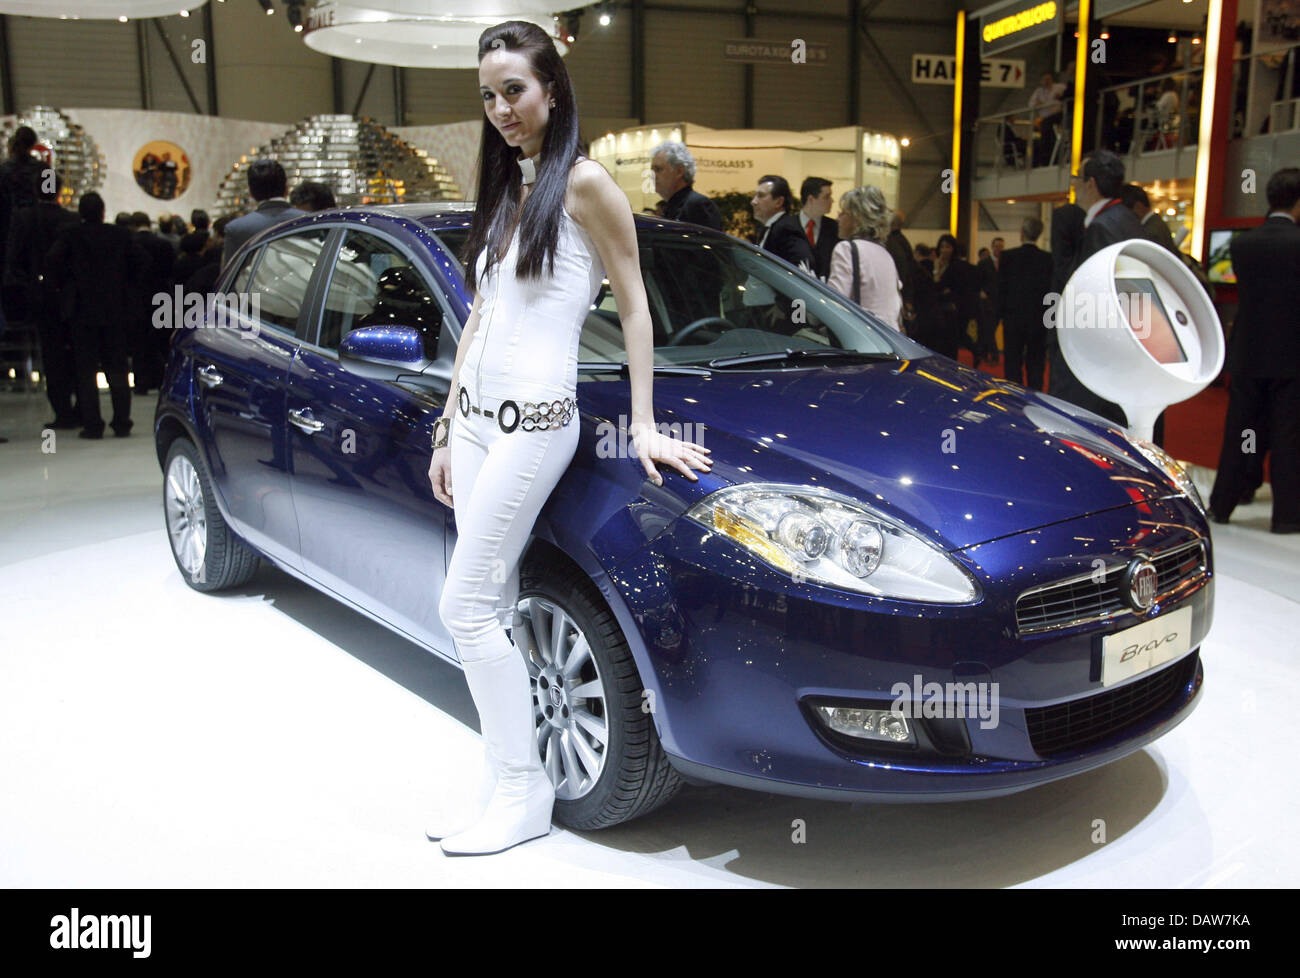 A hostess poses with a Fiat Bravo for the press at the Geneva Motor Show in Geneva, Switzerland, Tuesday, 06 March 2007. The trade show running from 8 to 18 March presents the latest developments of the automobile industry. Photo: Uli Deck Stock Photo